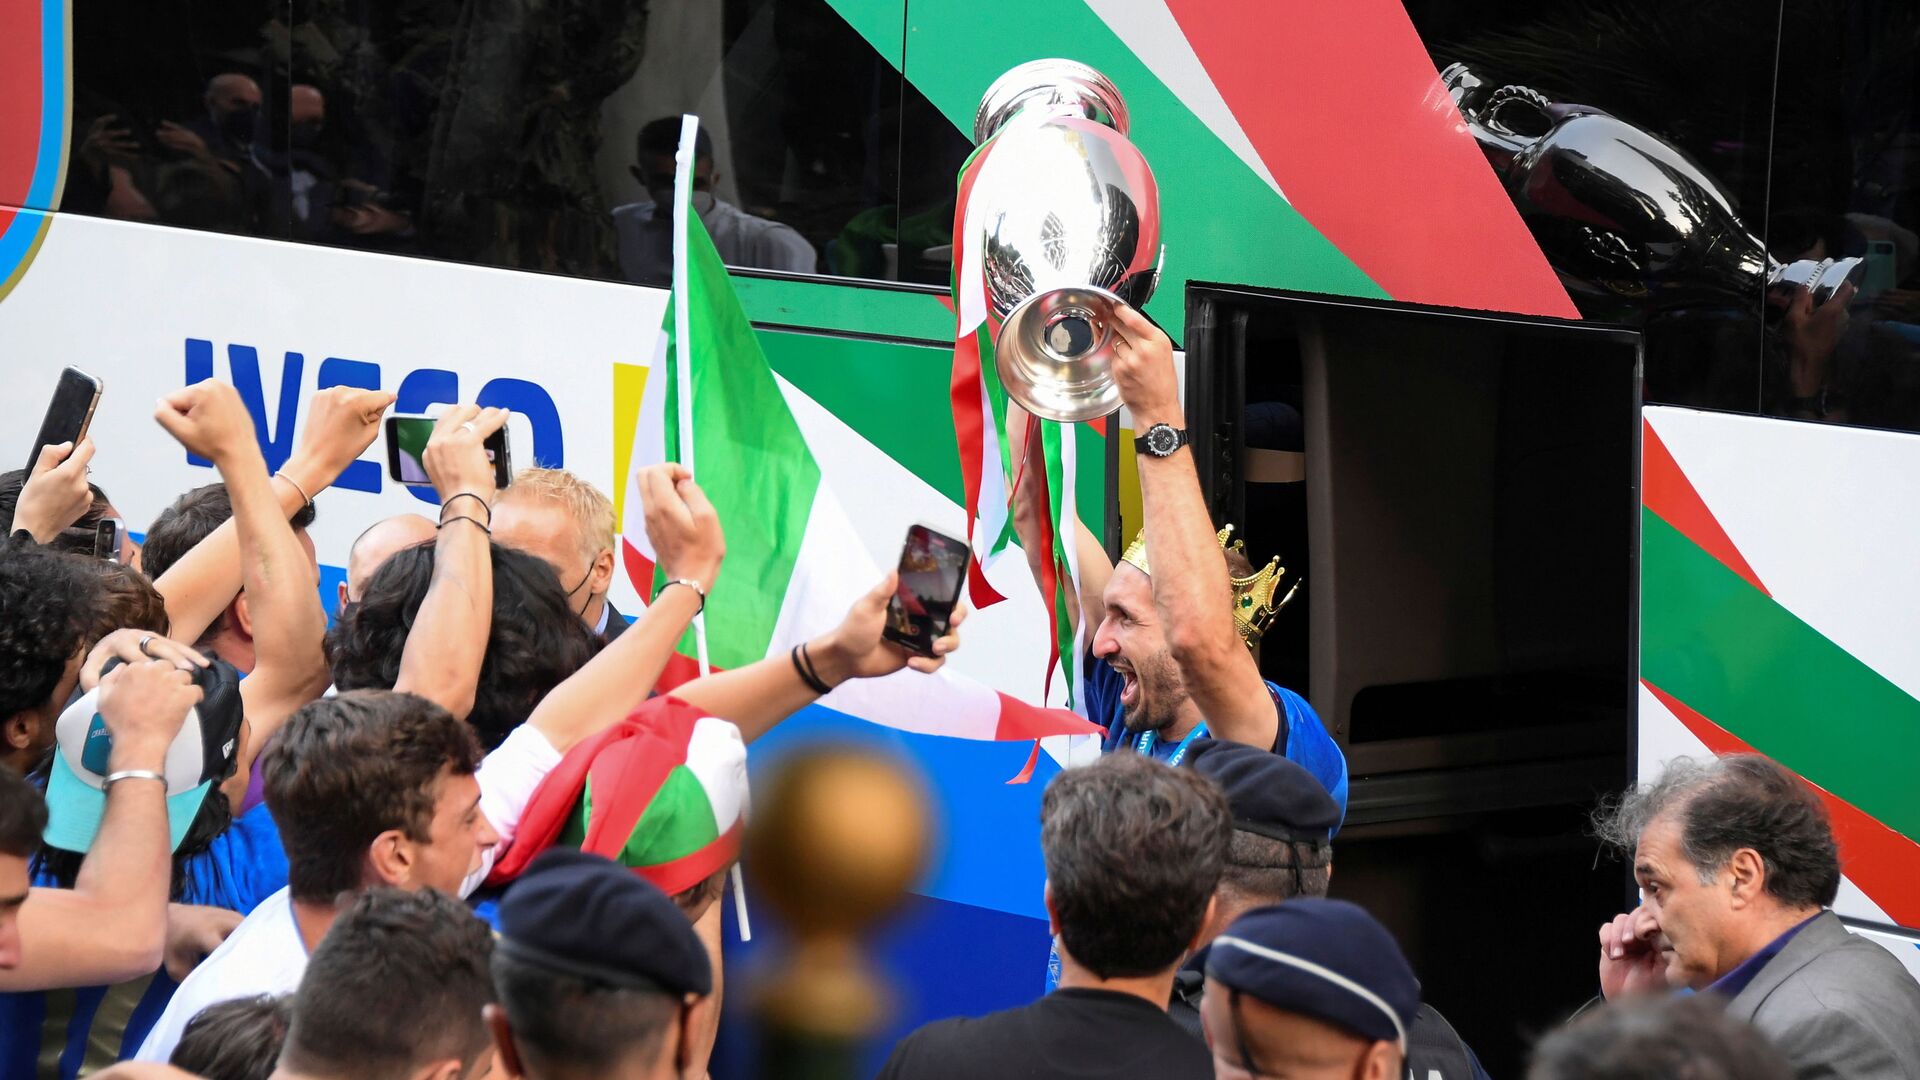 Soccer Football - Euro 2020 -  Rome, Italy - July 12, 2021 - Italy's Giorgio Chiellini exits the bus holding the Euro 2020 cup as the team arrives at the Parco dei Principi hotel after winning the European Championship - اسپوتنیک افغانستان  , 1920, 14.07.2021